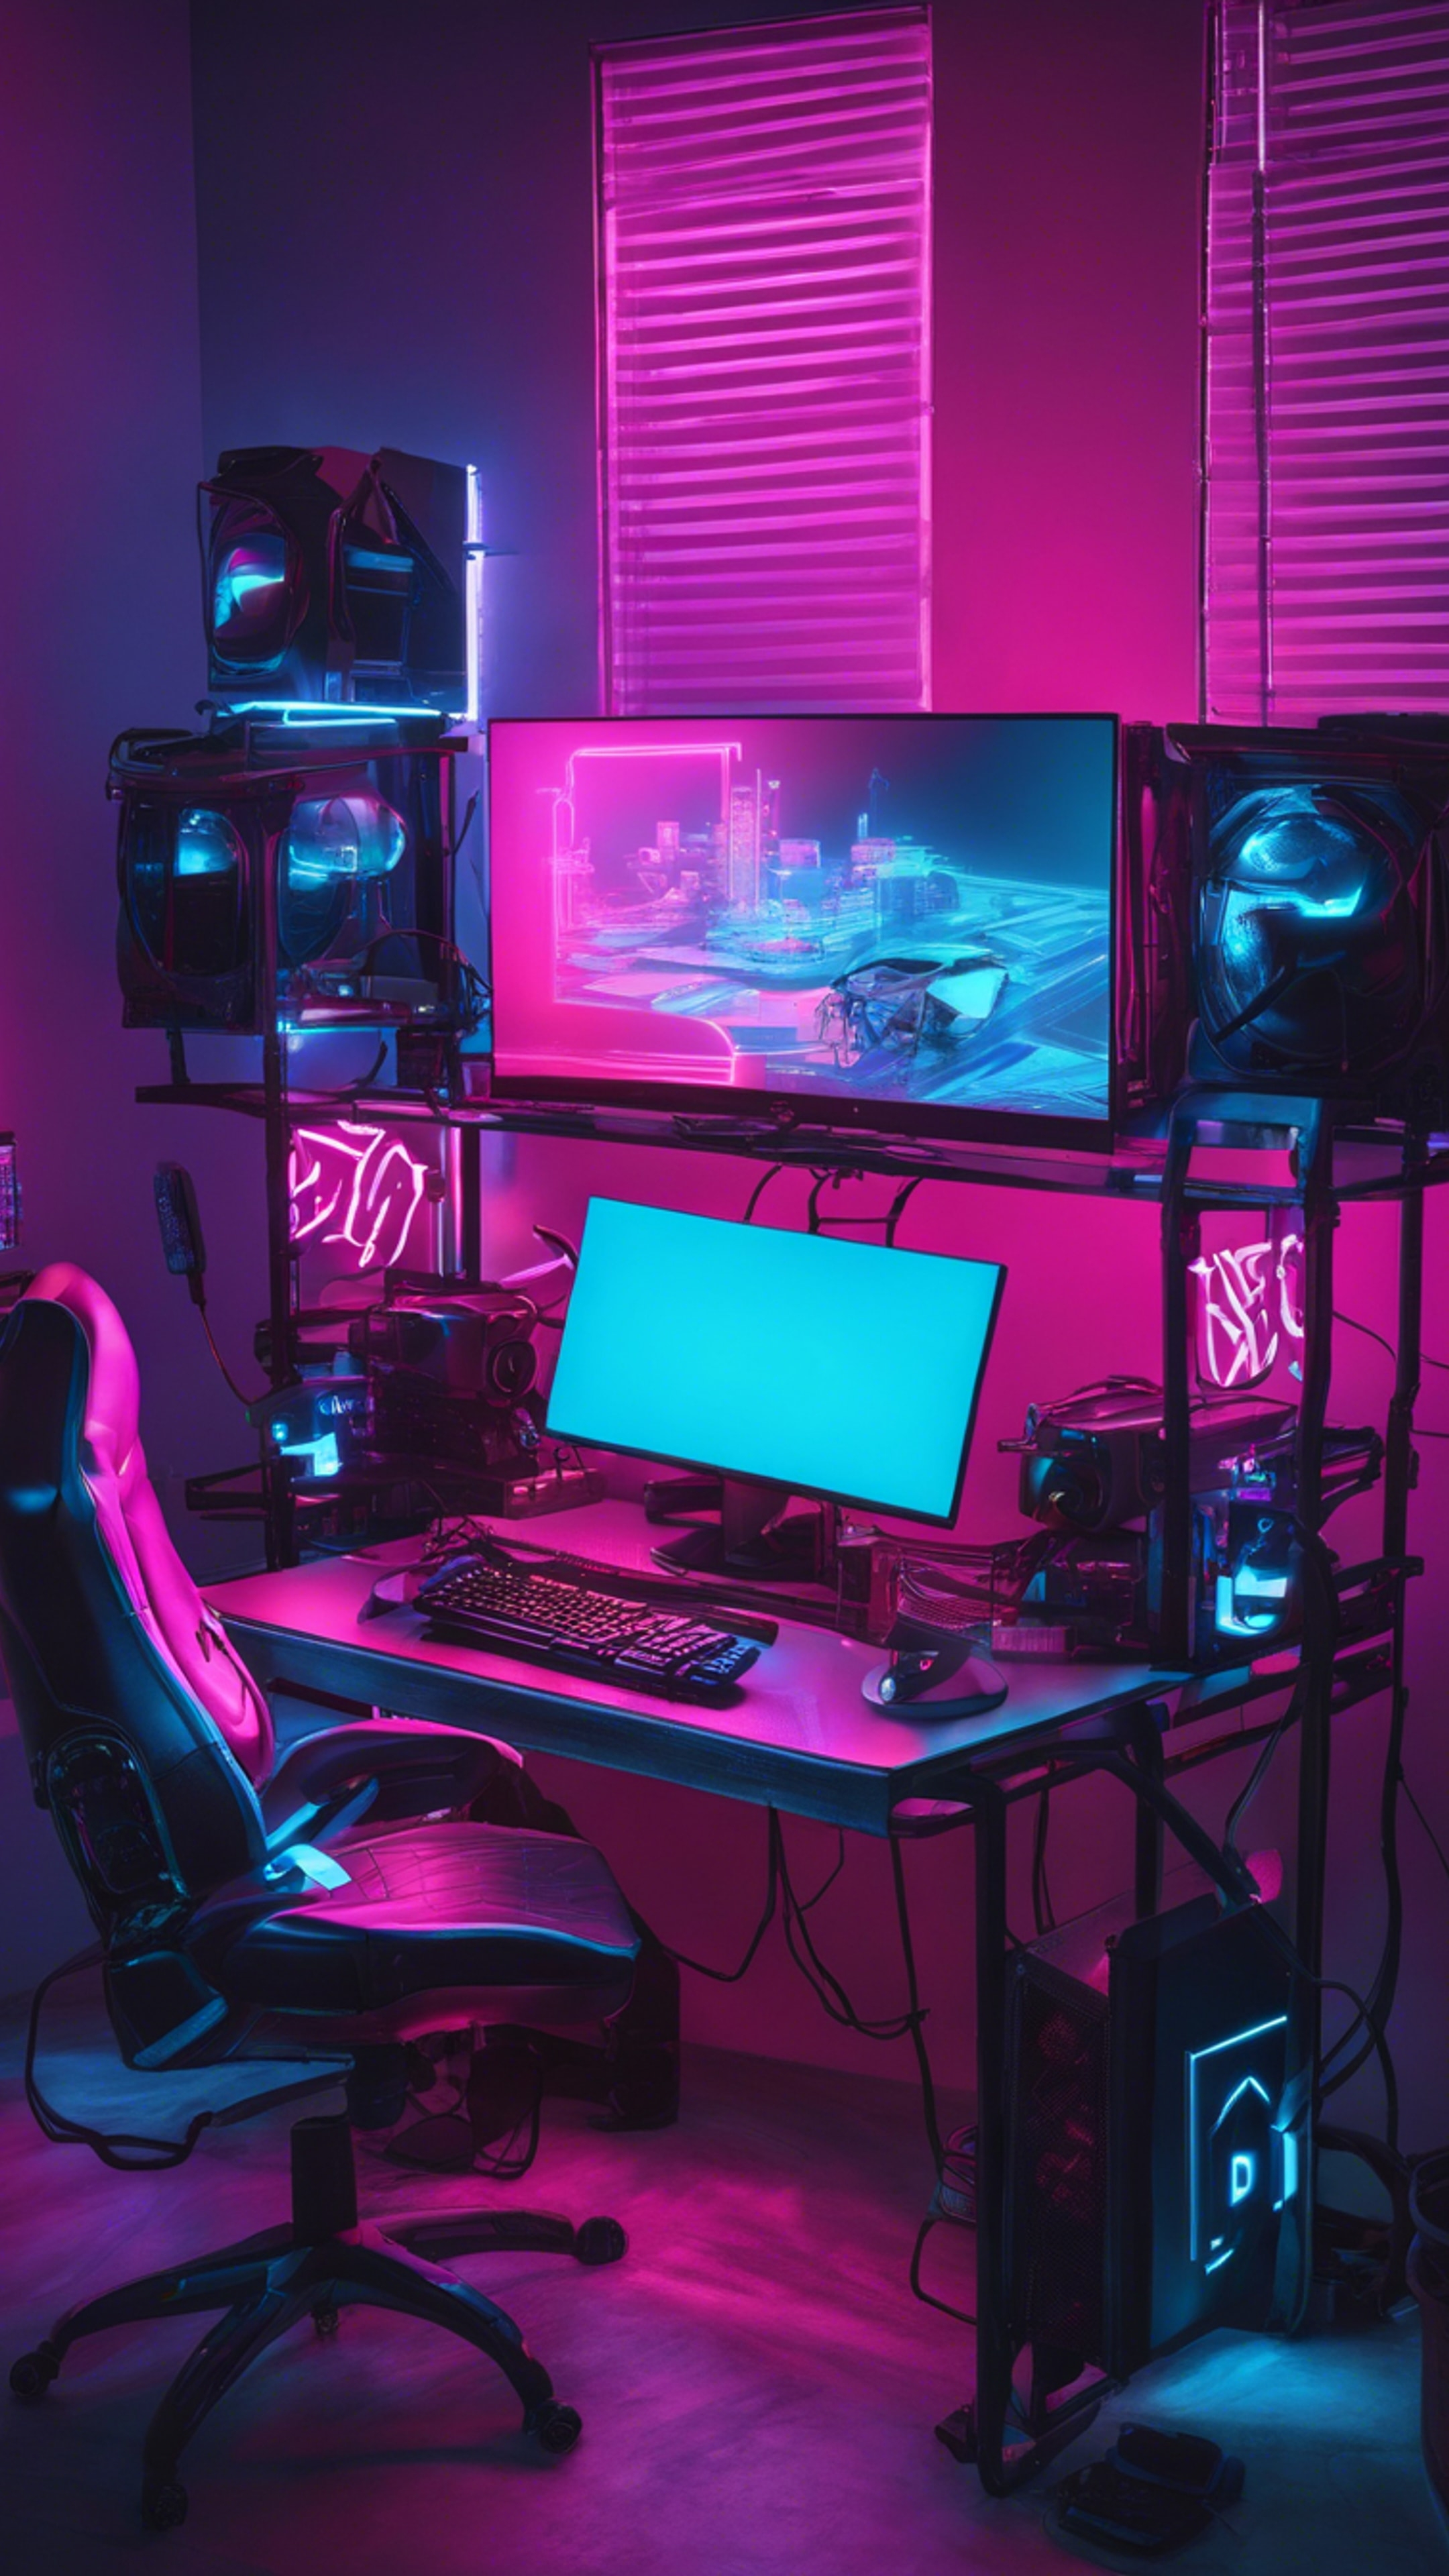 A neon blue gaming setup with a high-end PC, LED keyboard and a gaming monitor. کاغذ دیواری[173ea11d79a5456c932c]